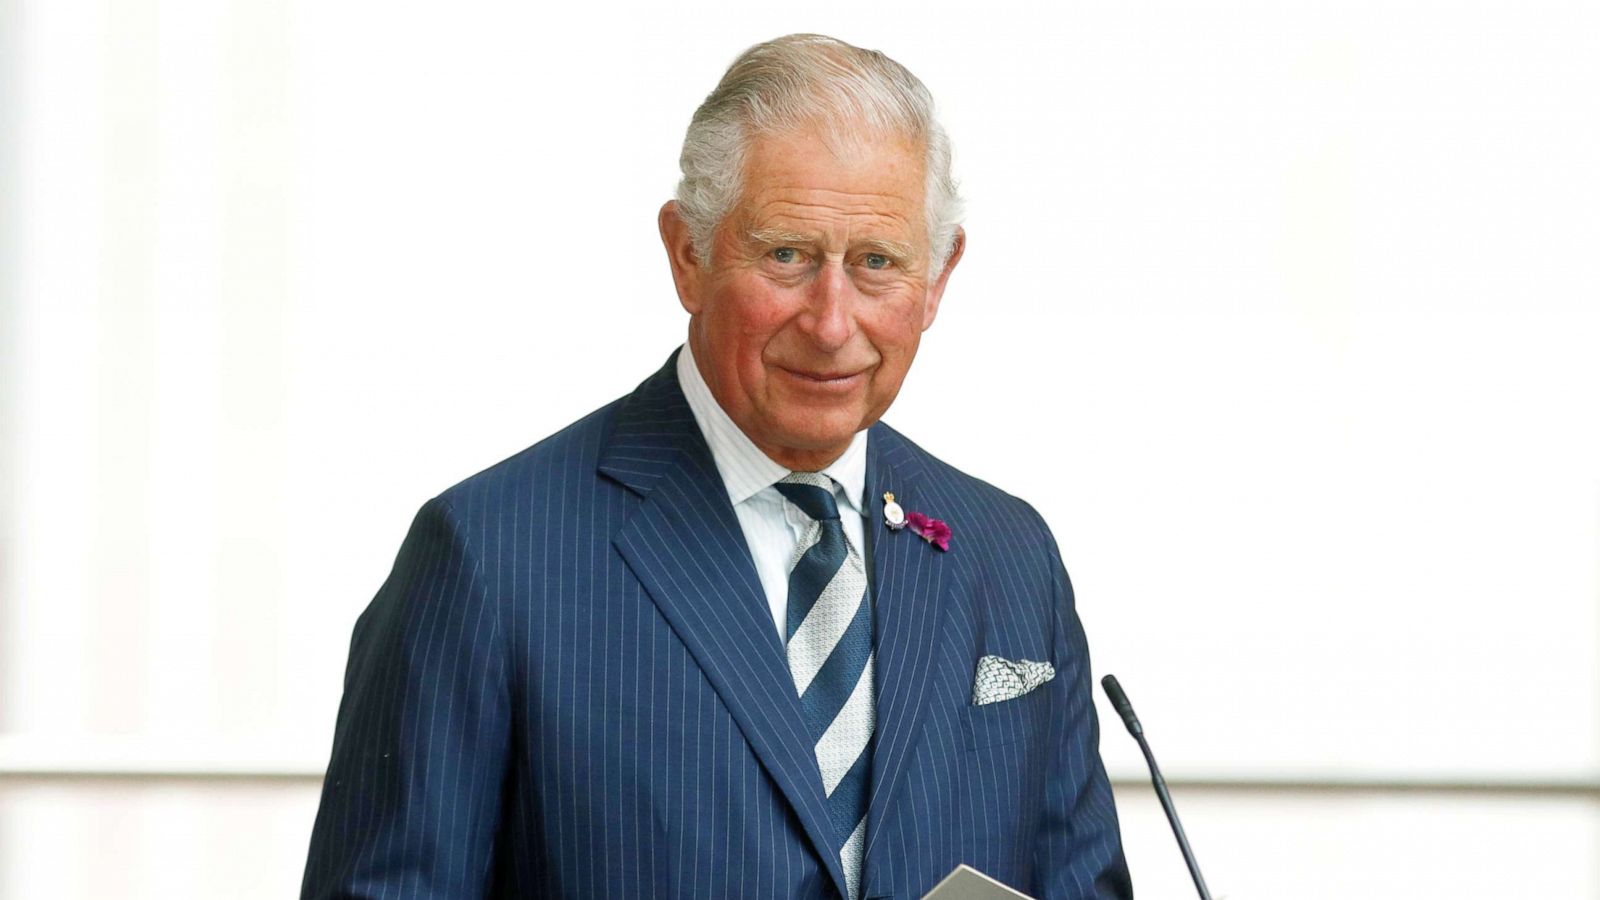 King Charles III: The UK monarch's age, spouse, everything to know